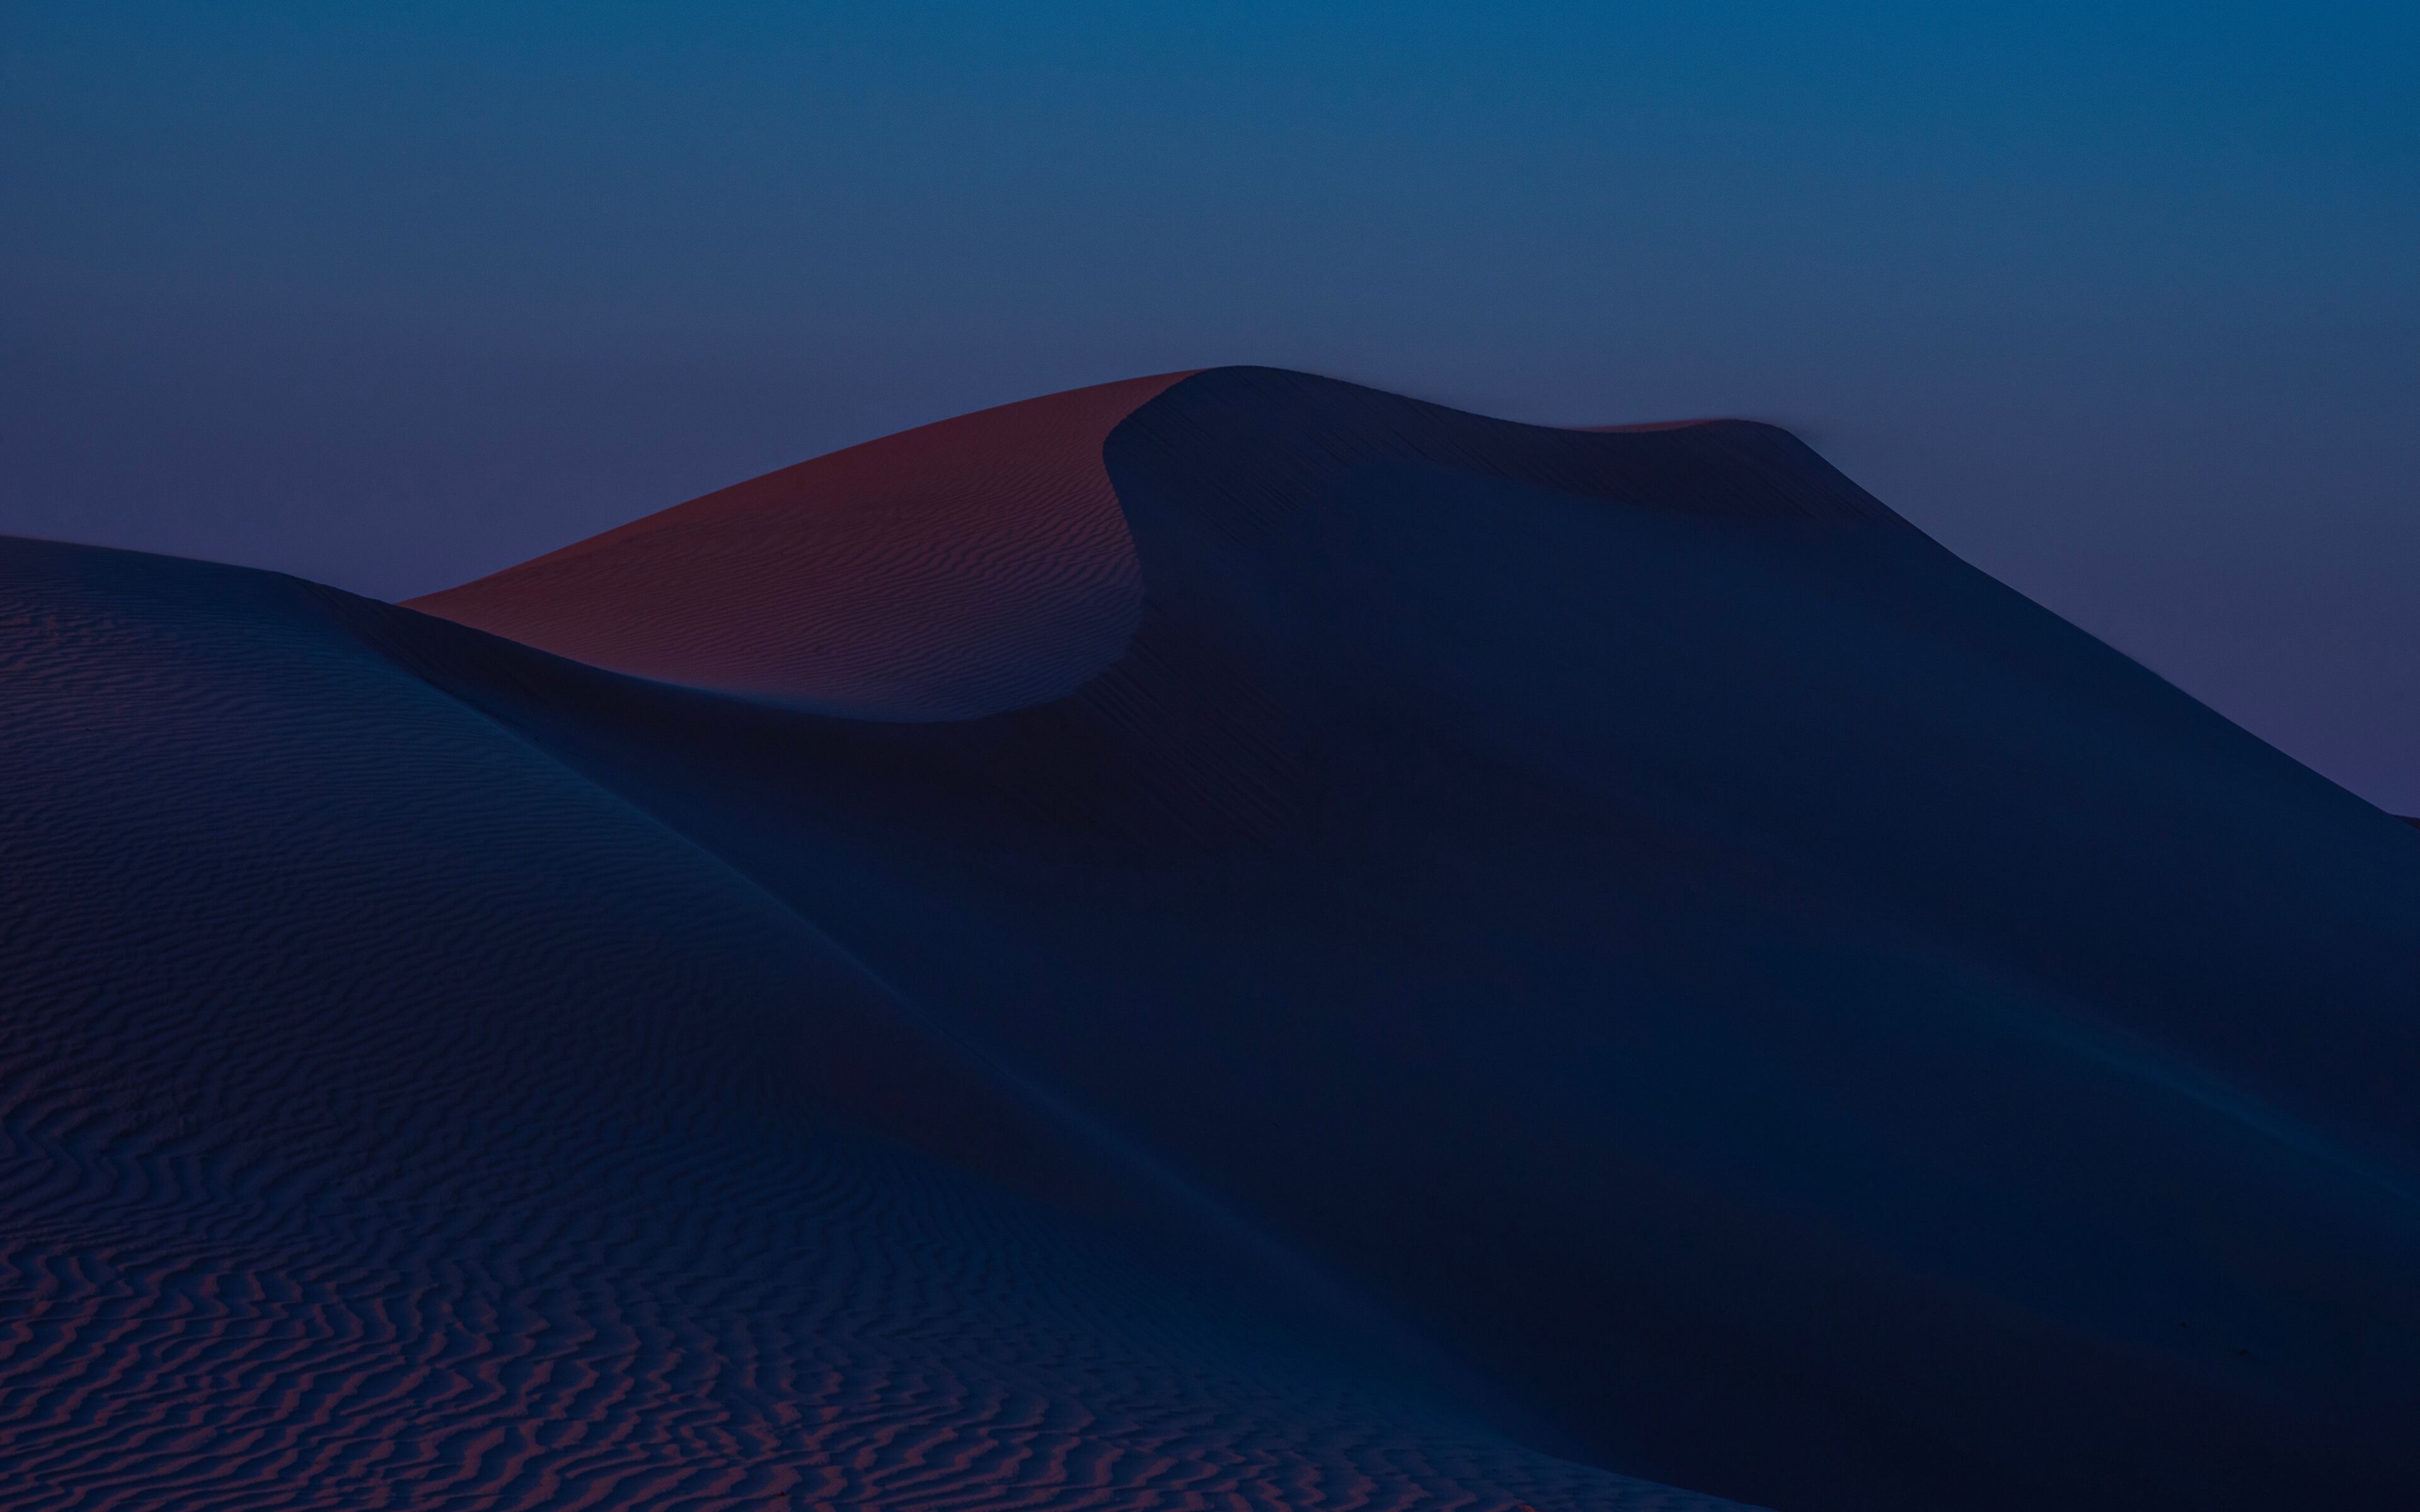 Dune 4K wallpapers for your desktop or mobile screen free and easy to  download